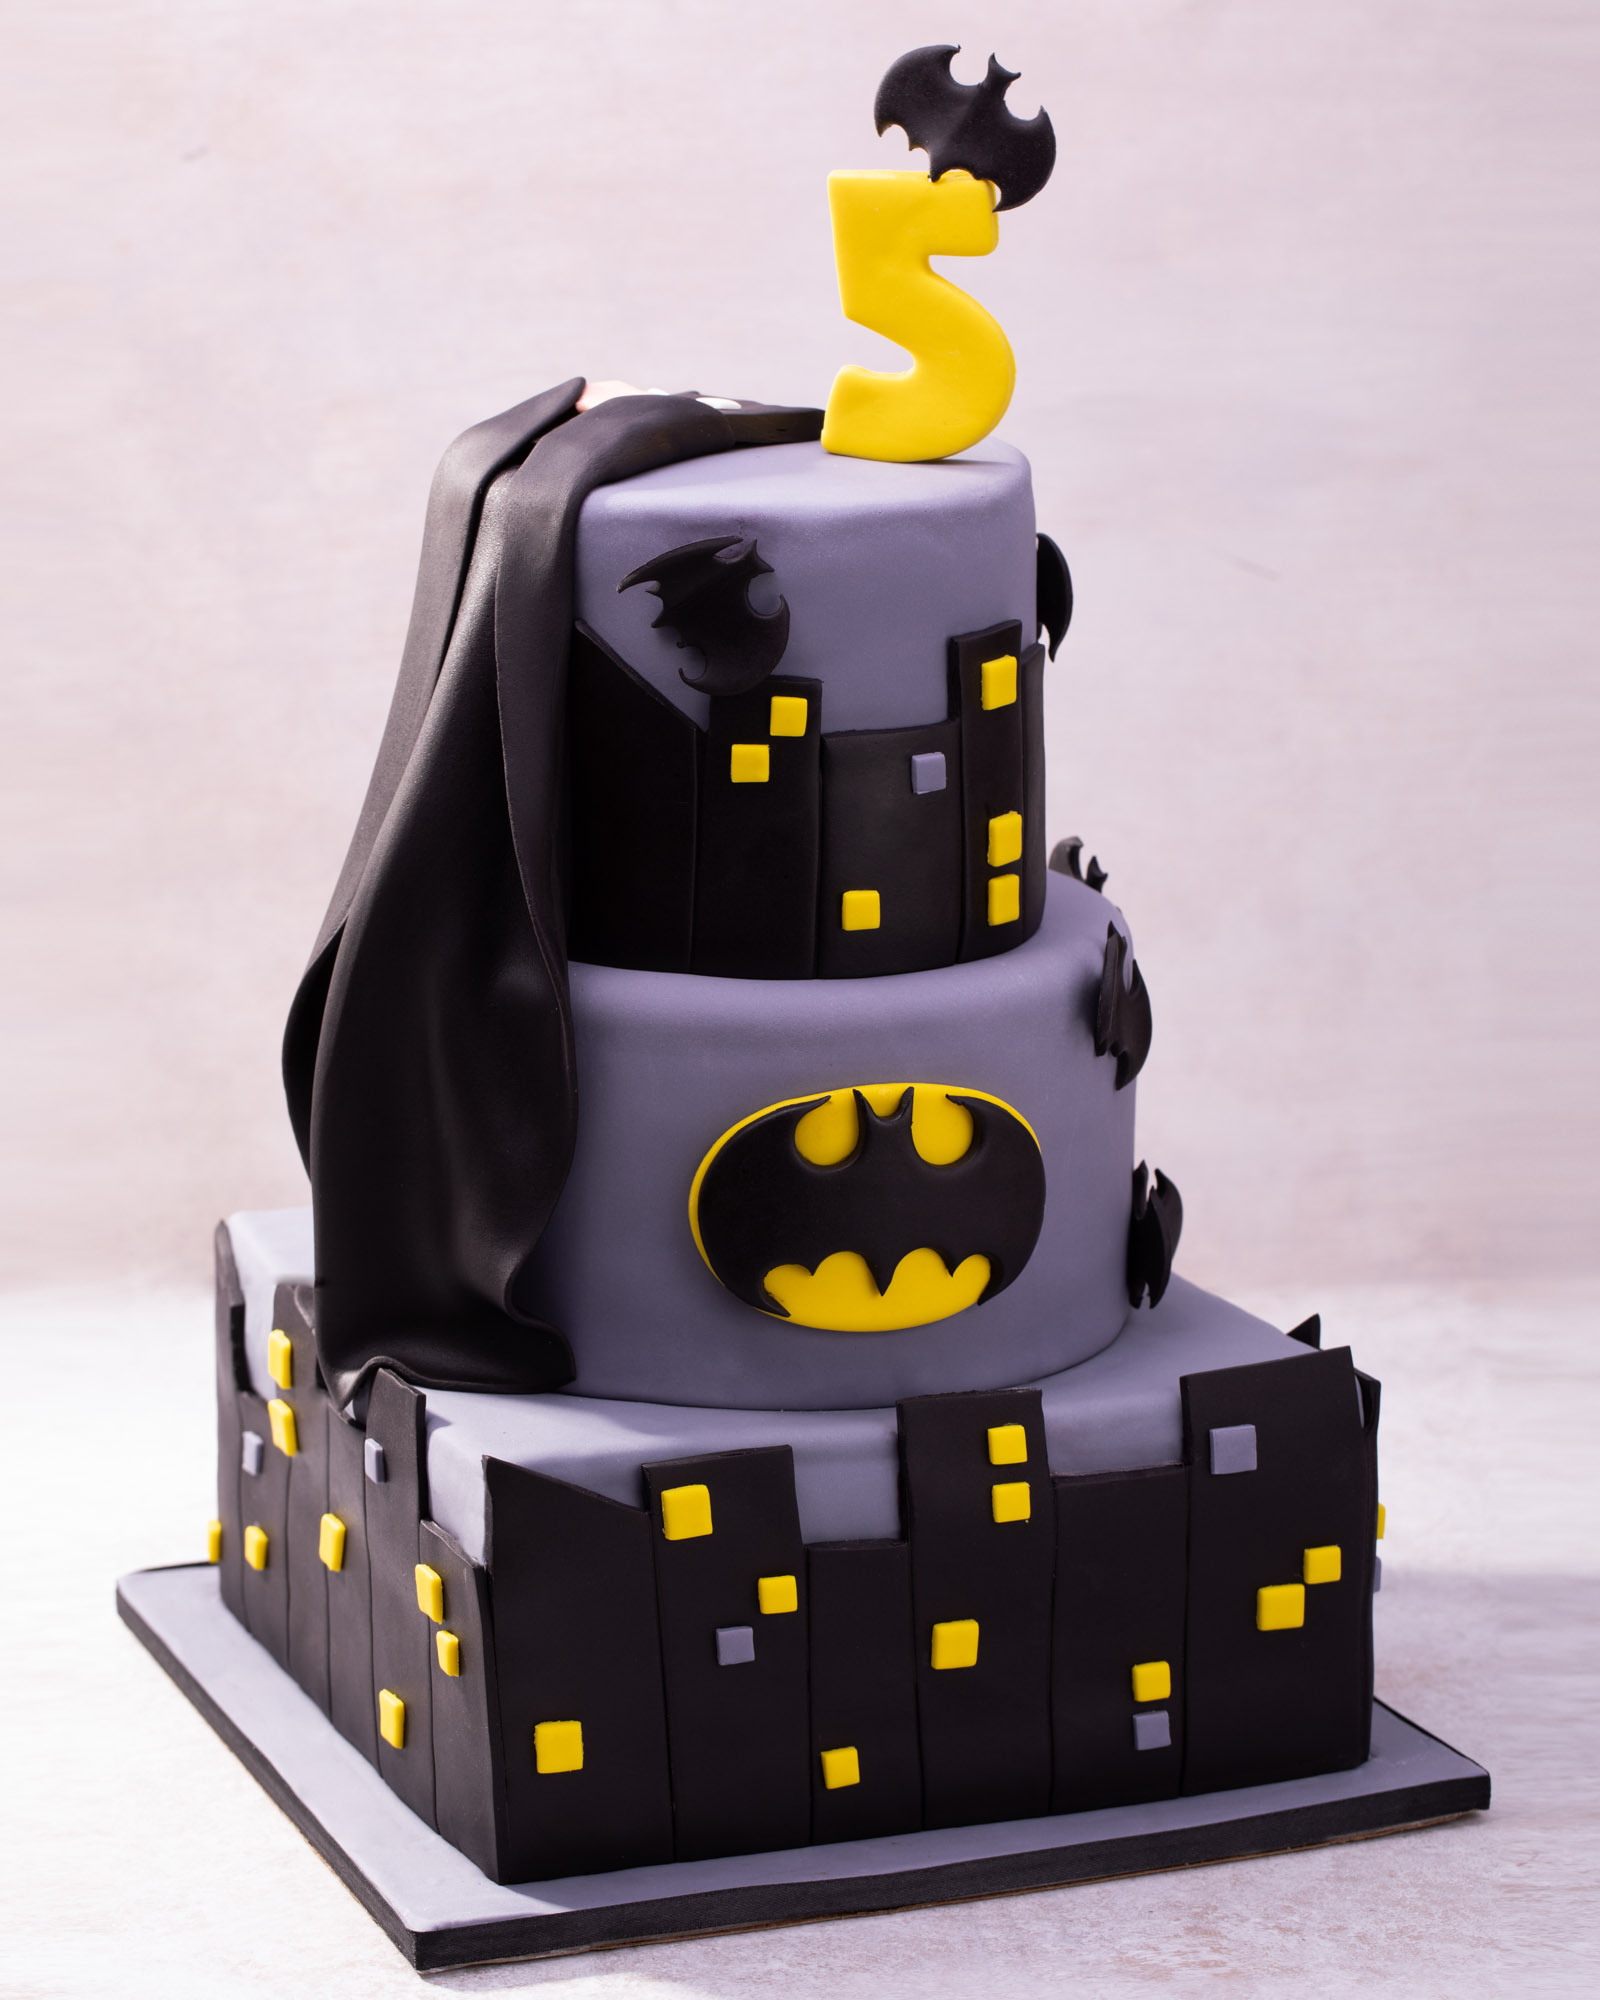 Batman Cake - Buy Online, Free UK Delivery — New Cakes